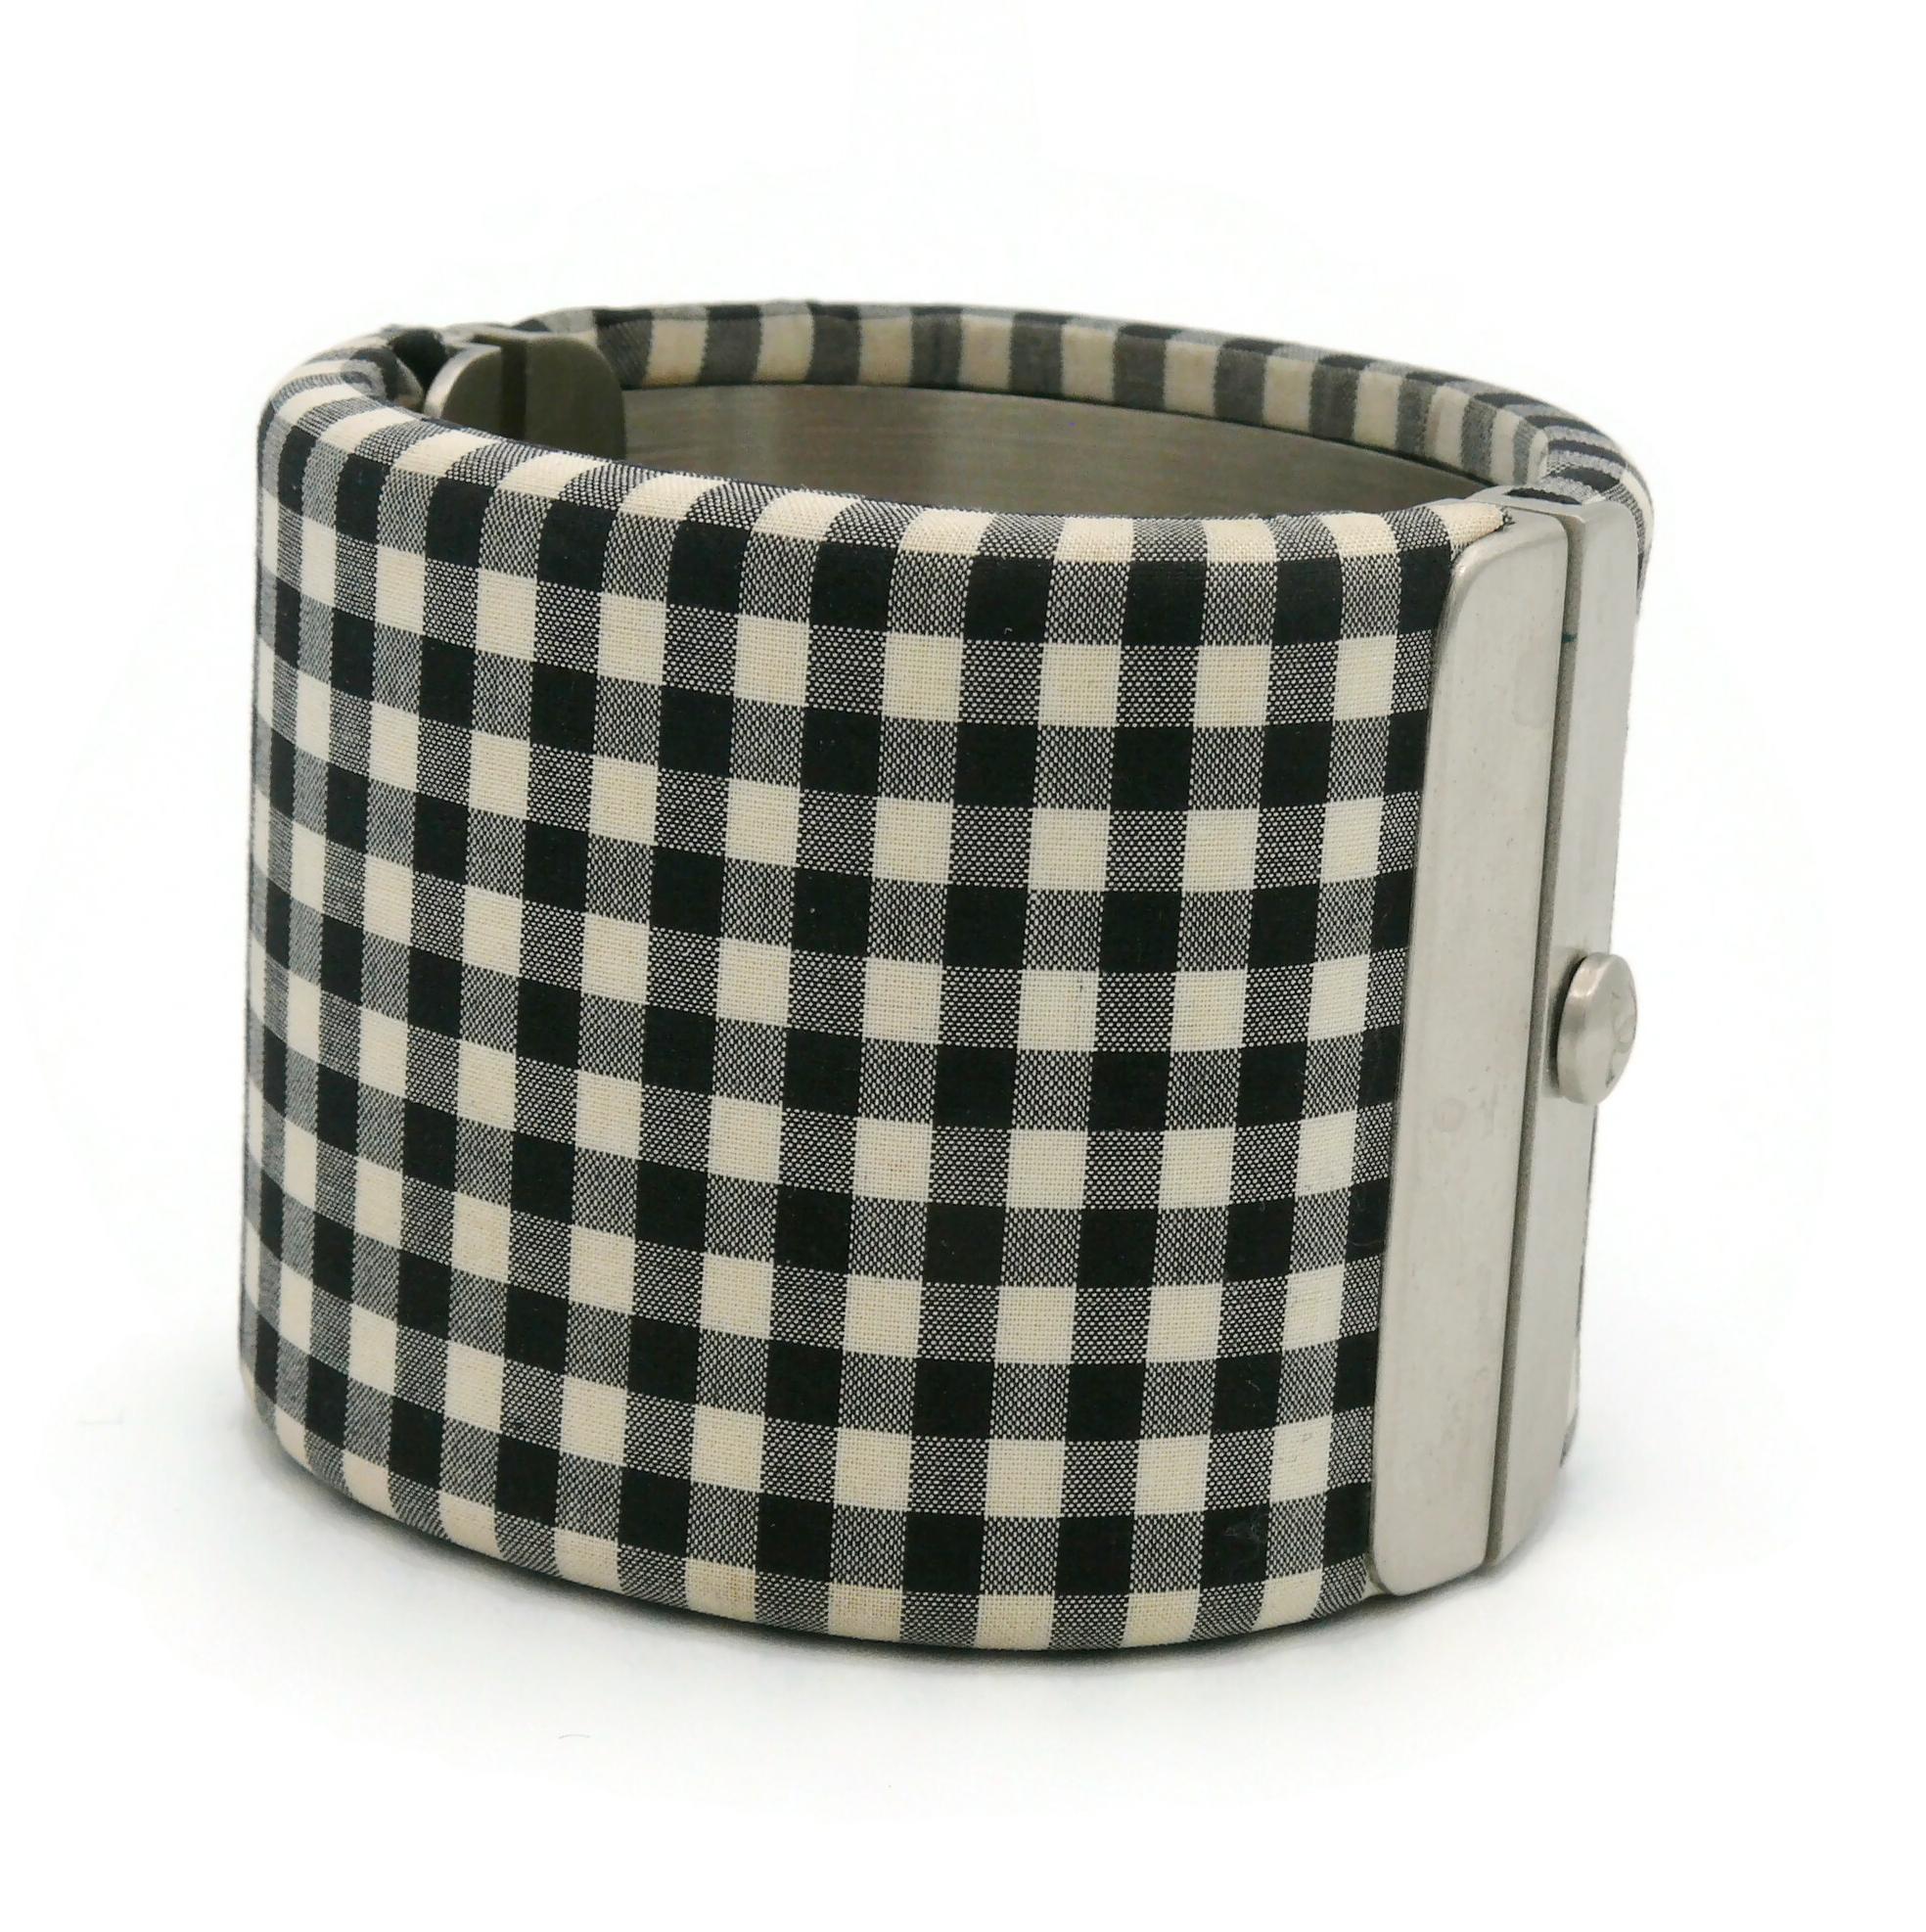 CHANEL Black and White Gingham Vichy Print Cuff Bracelet, Resort Collection 2011 For Sale 1